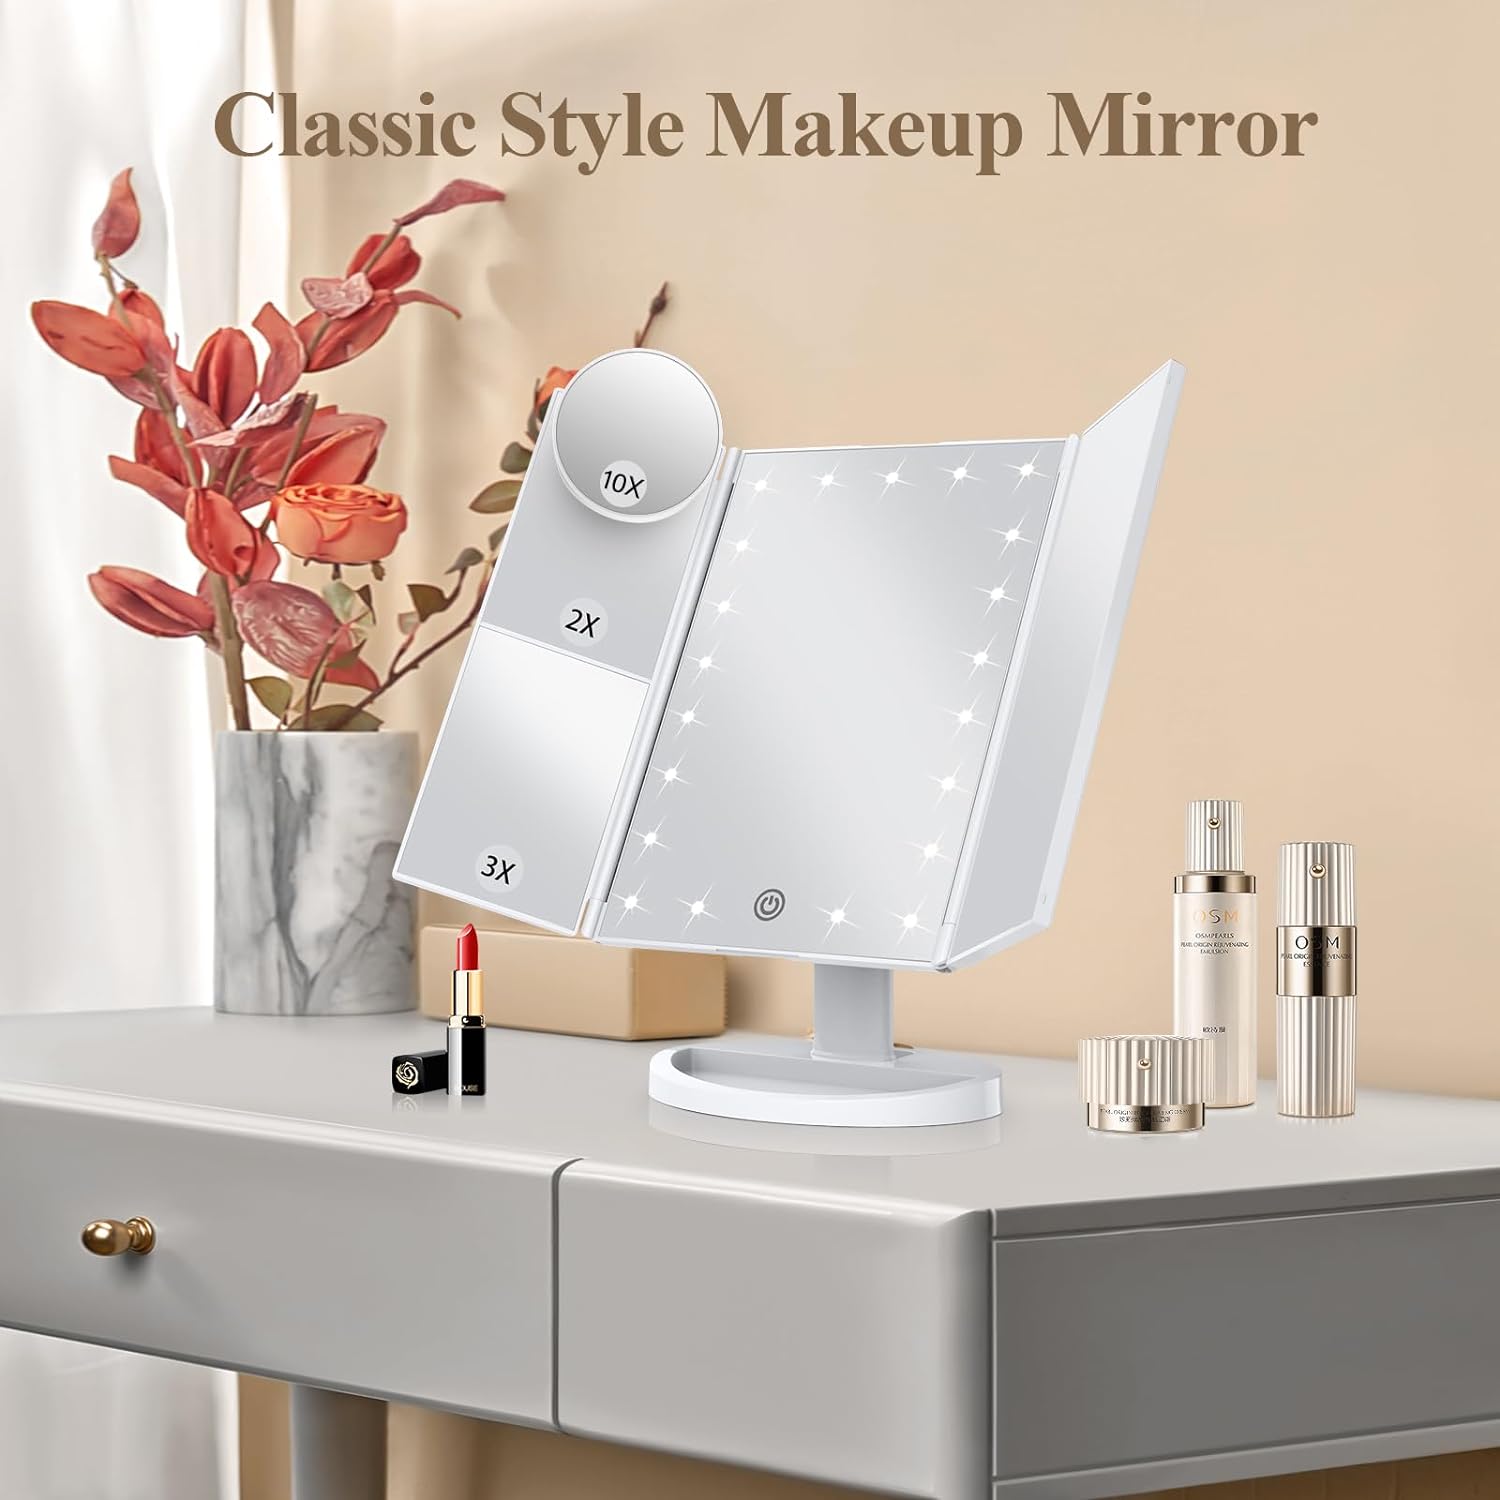 Makeup Mirror Vanity Mirror with Lights, 2X 3X 10X Magnification, Lighted Makeup Mirror, Touch Control